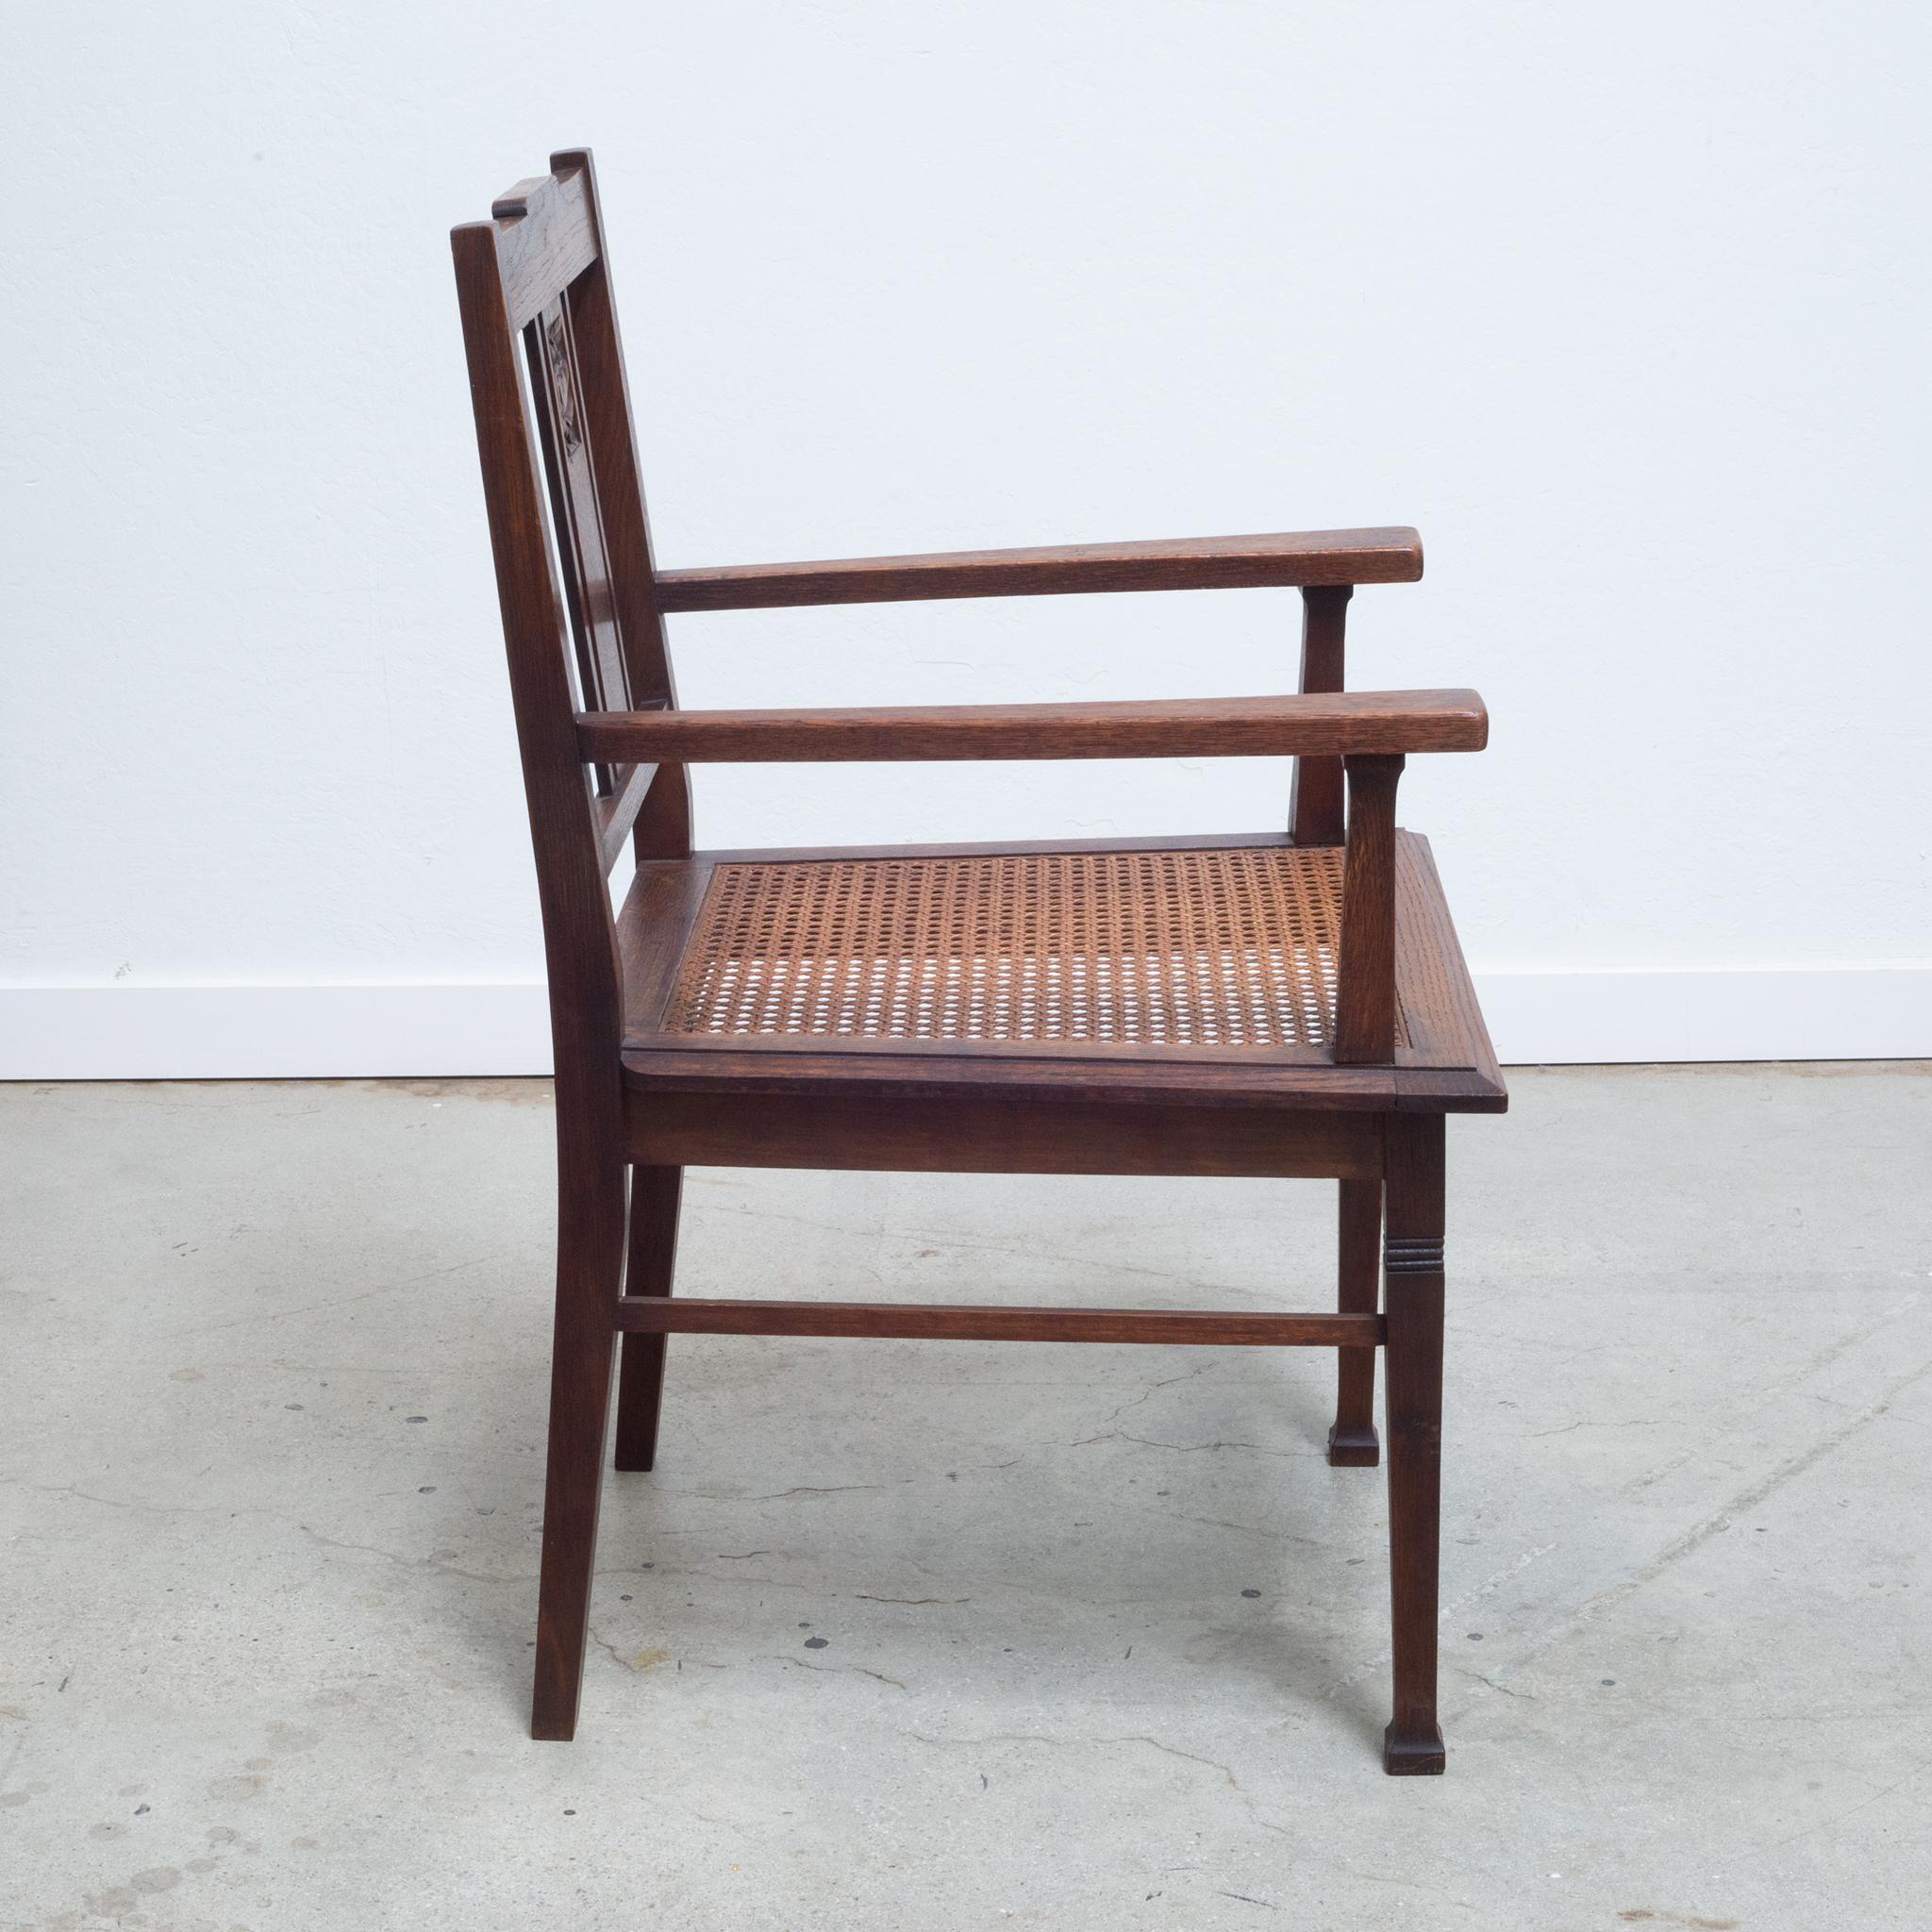 Victorian Early 20th C. Glasgow Style Arts and Crafts Caned Oak Arm Chair, c.1900 For Sale